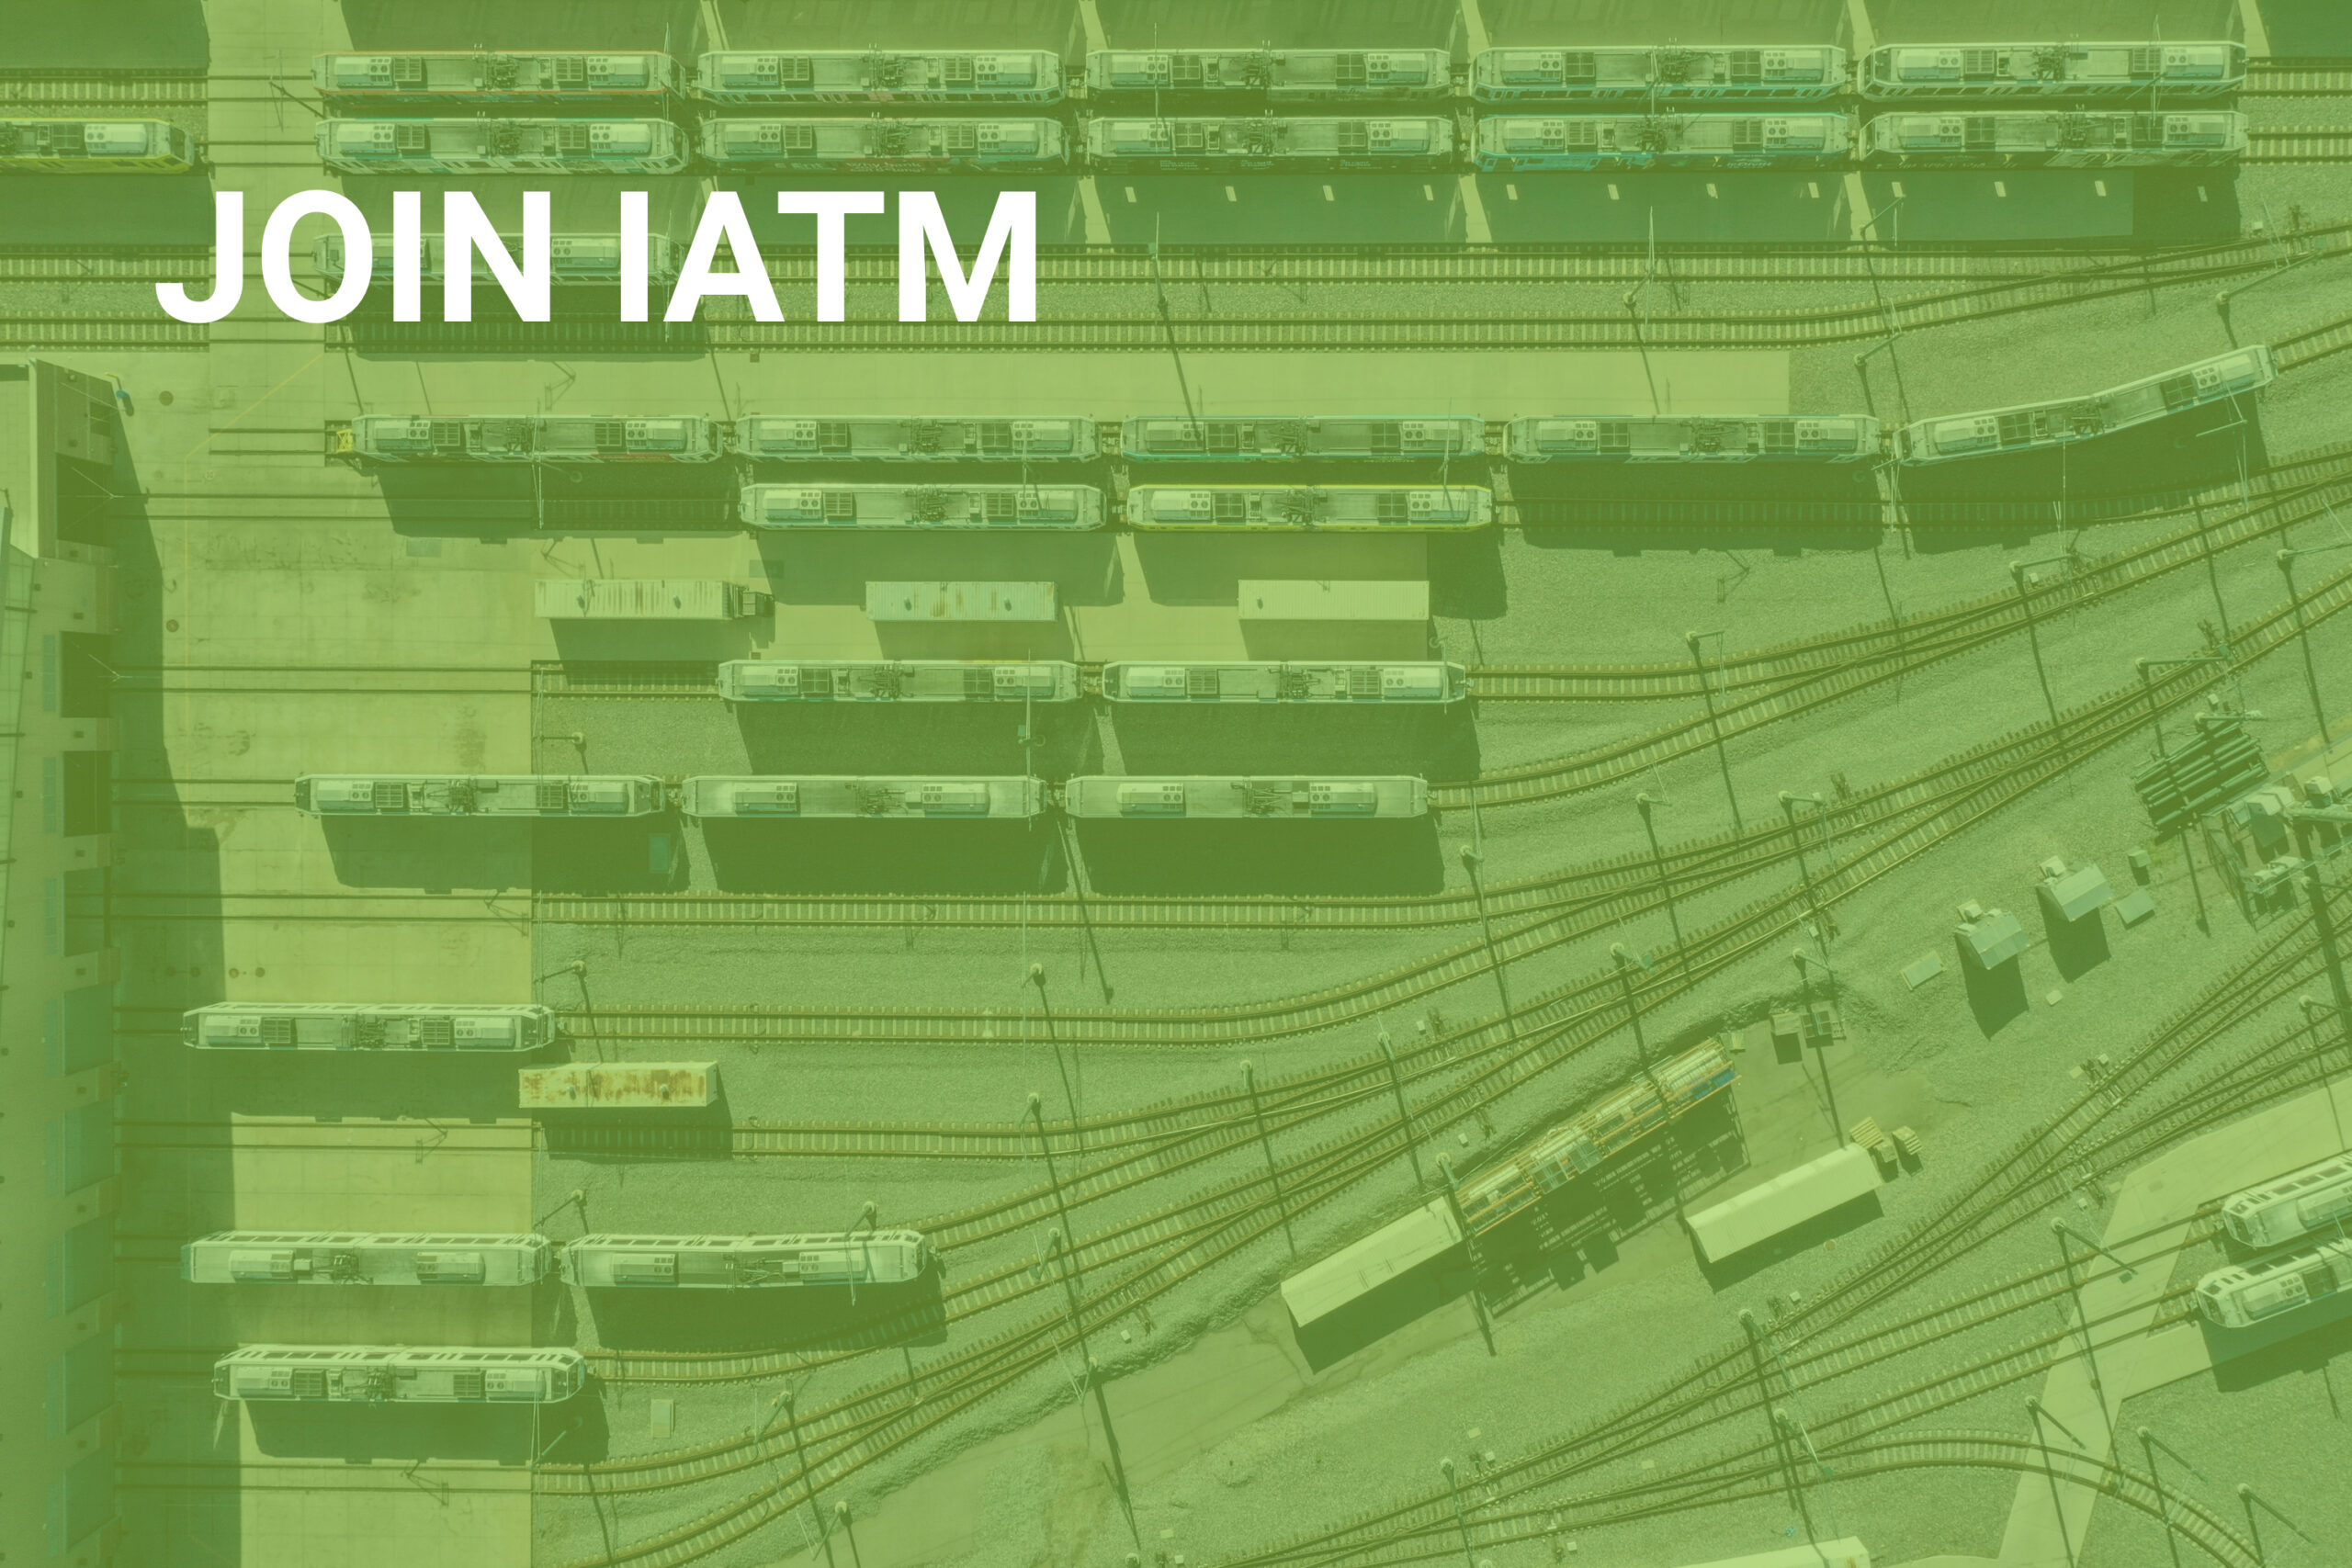 Aerial view of train tracks at a railway yard covered by a slightly transparent green screen text in top left hand corner: Join IATM